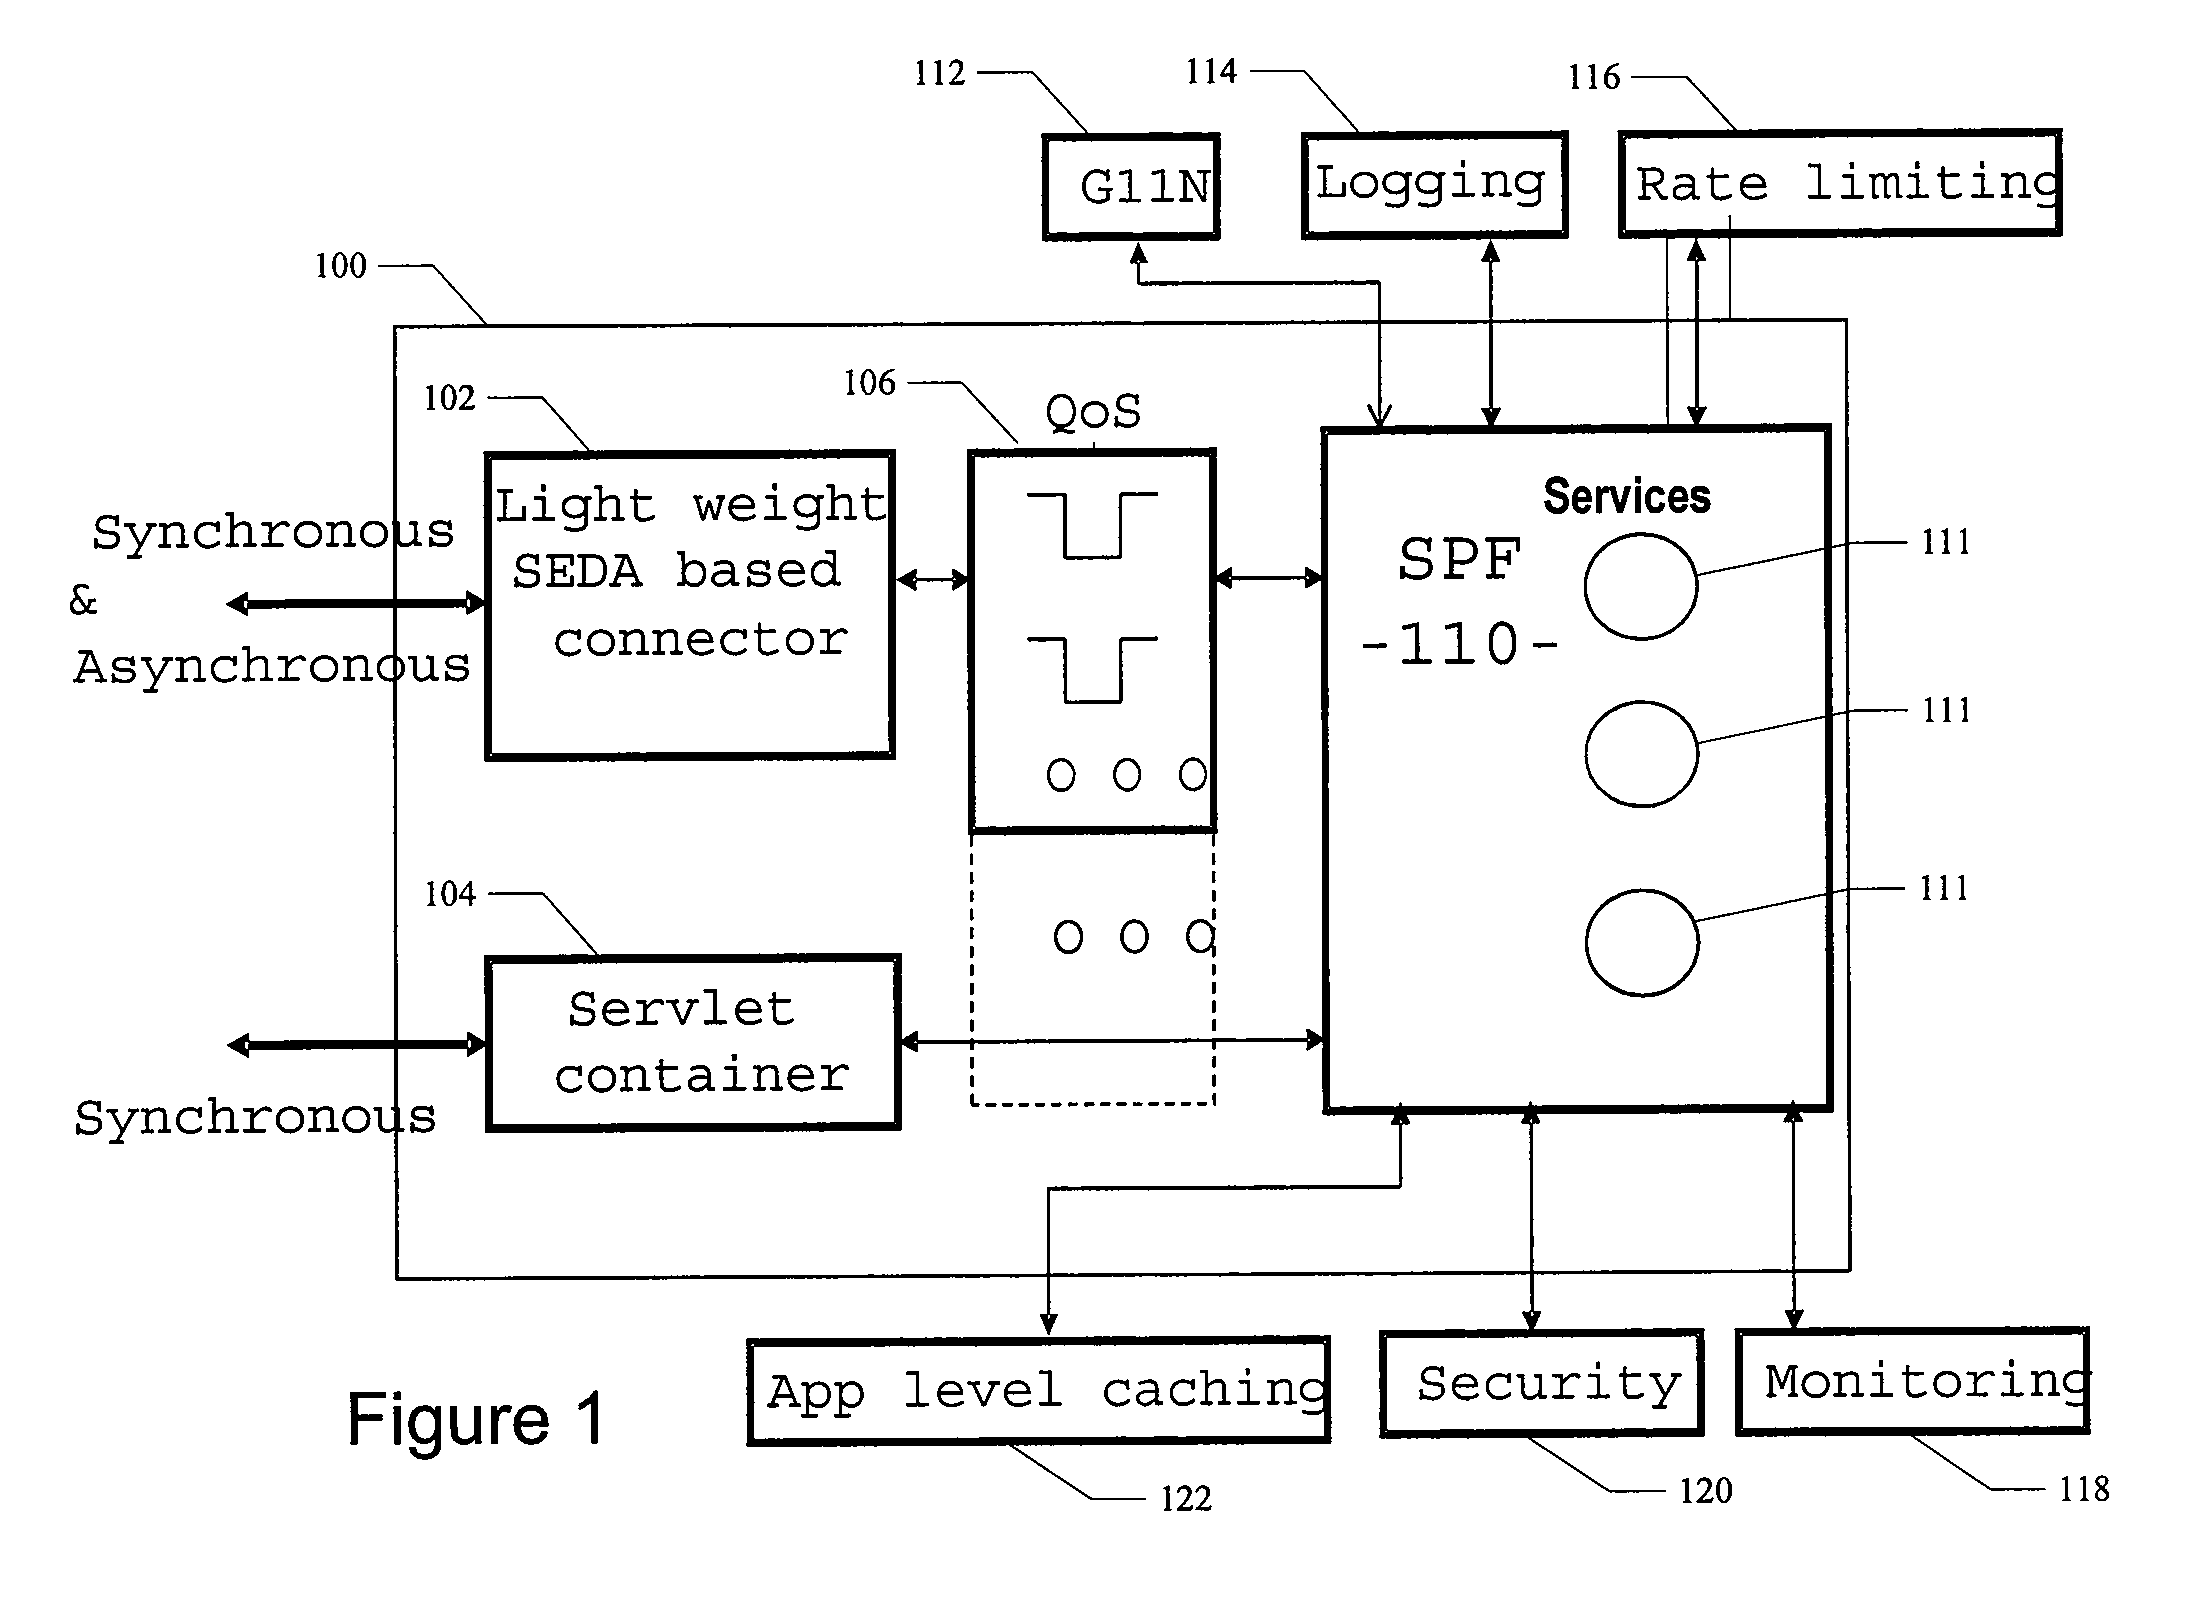 System and method for processing messages using a common interface platform supporting multiple pluggable data formats in a service-oriented pipeline architecture